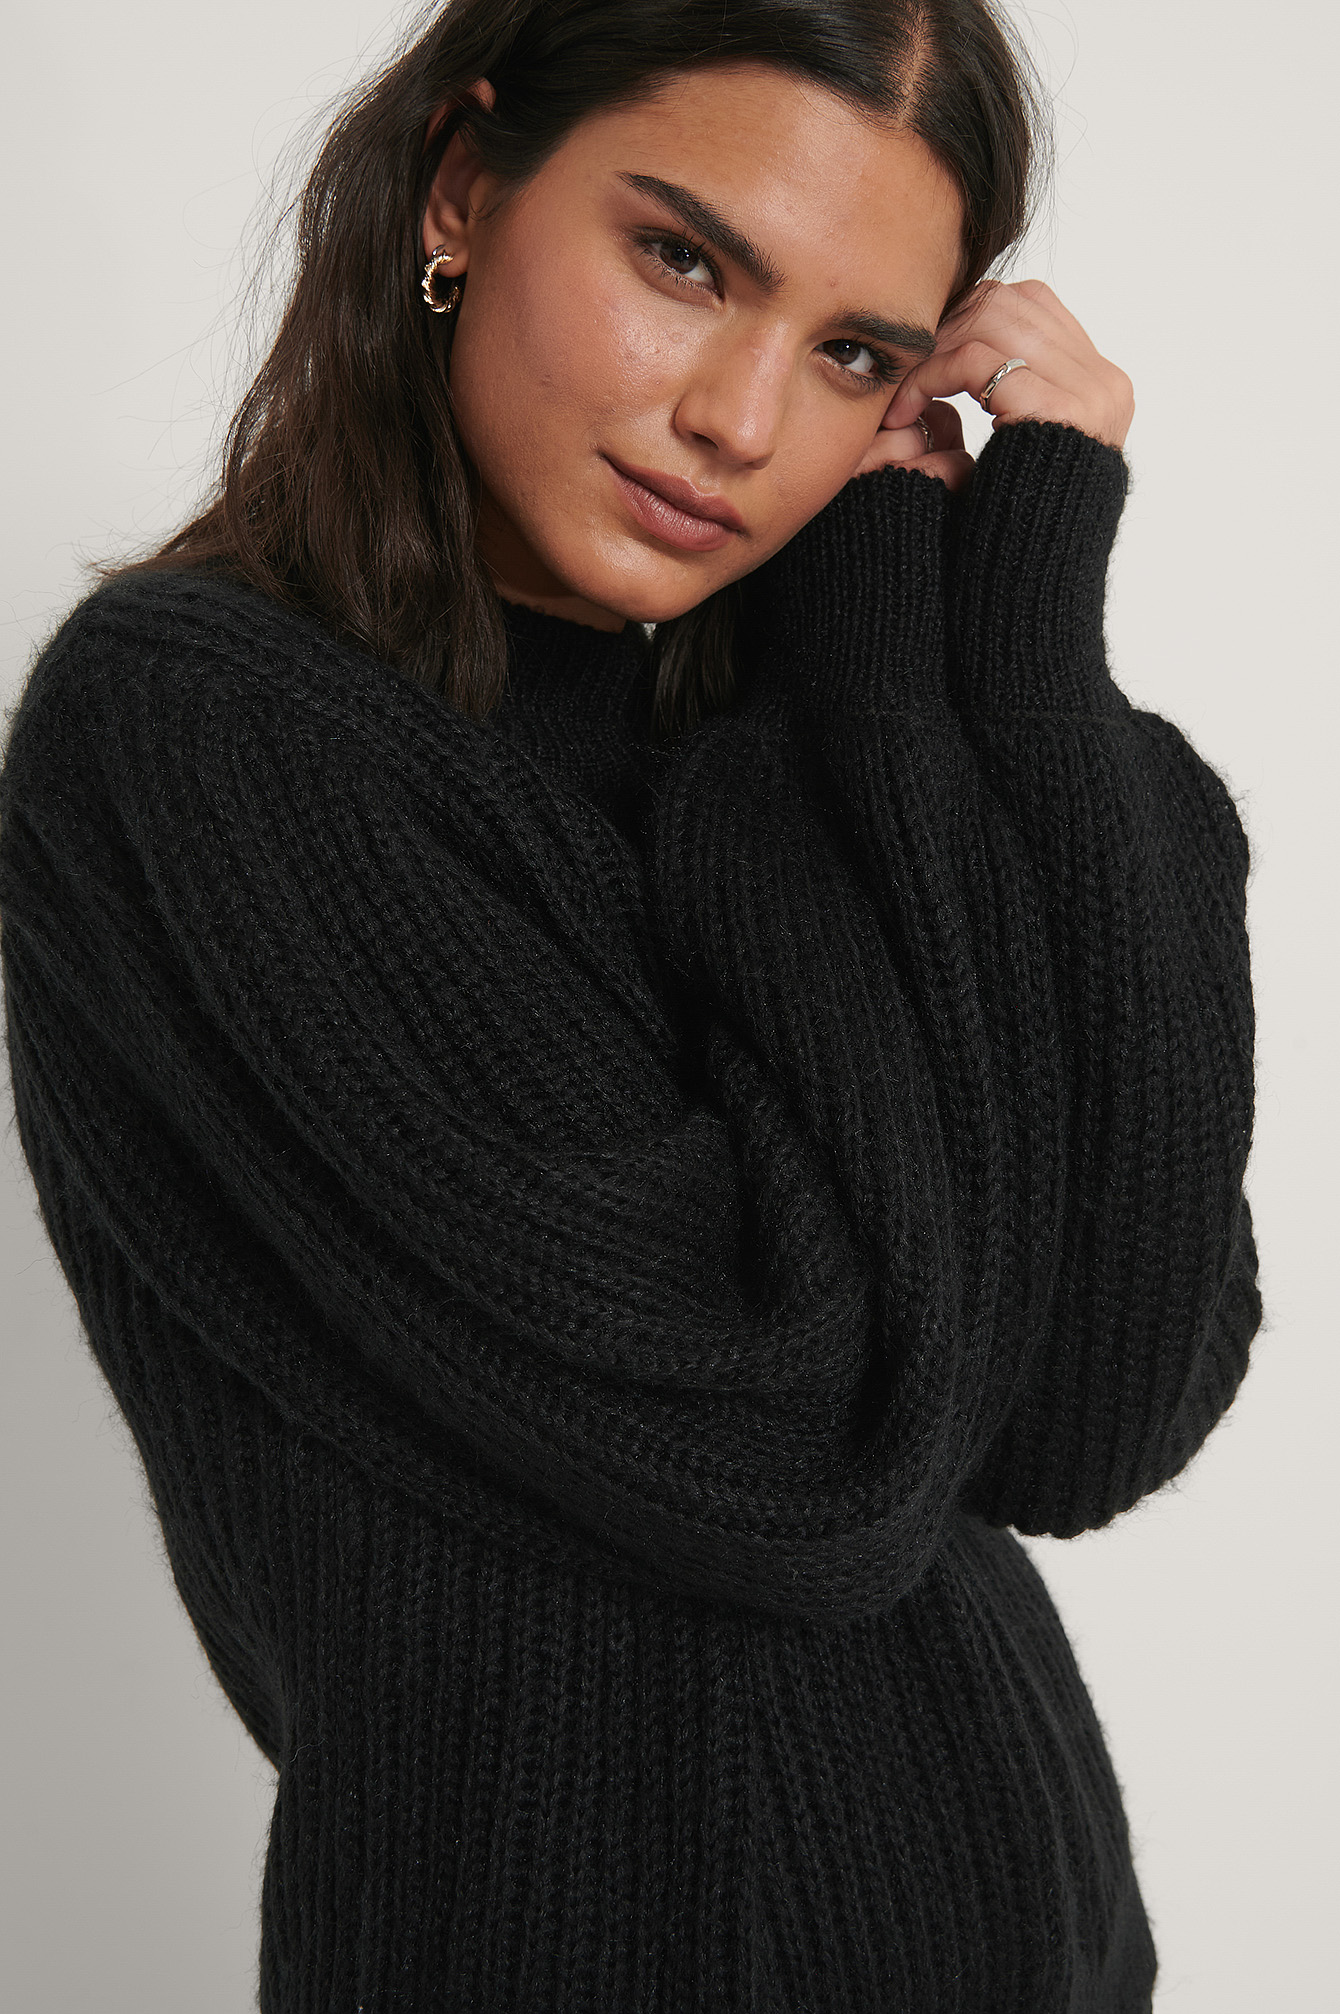 Black Puff Sleeve Knitted Sweater